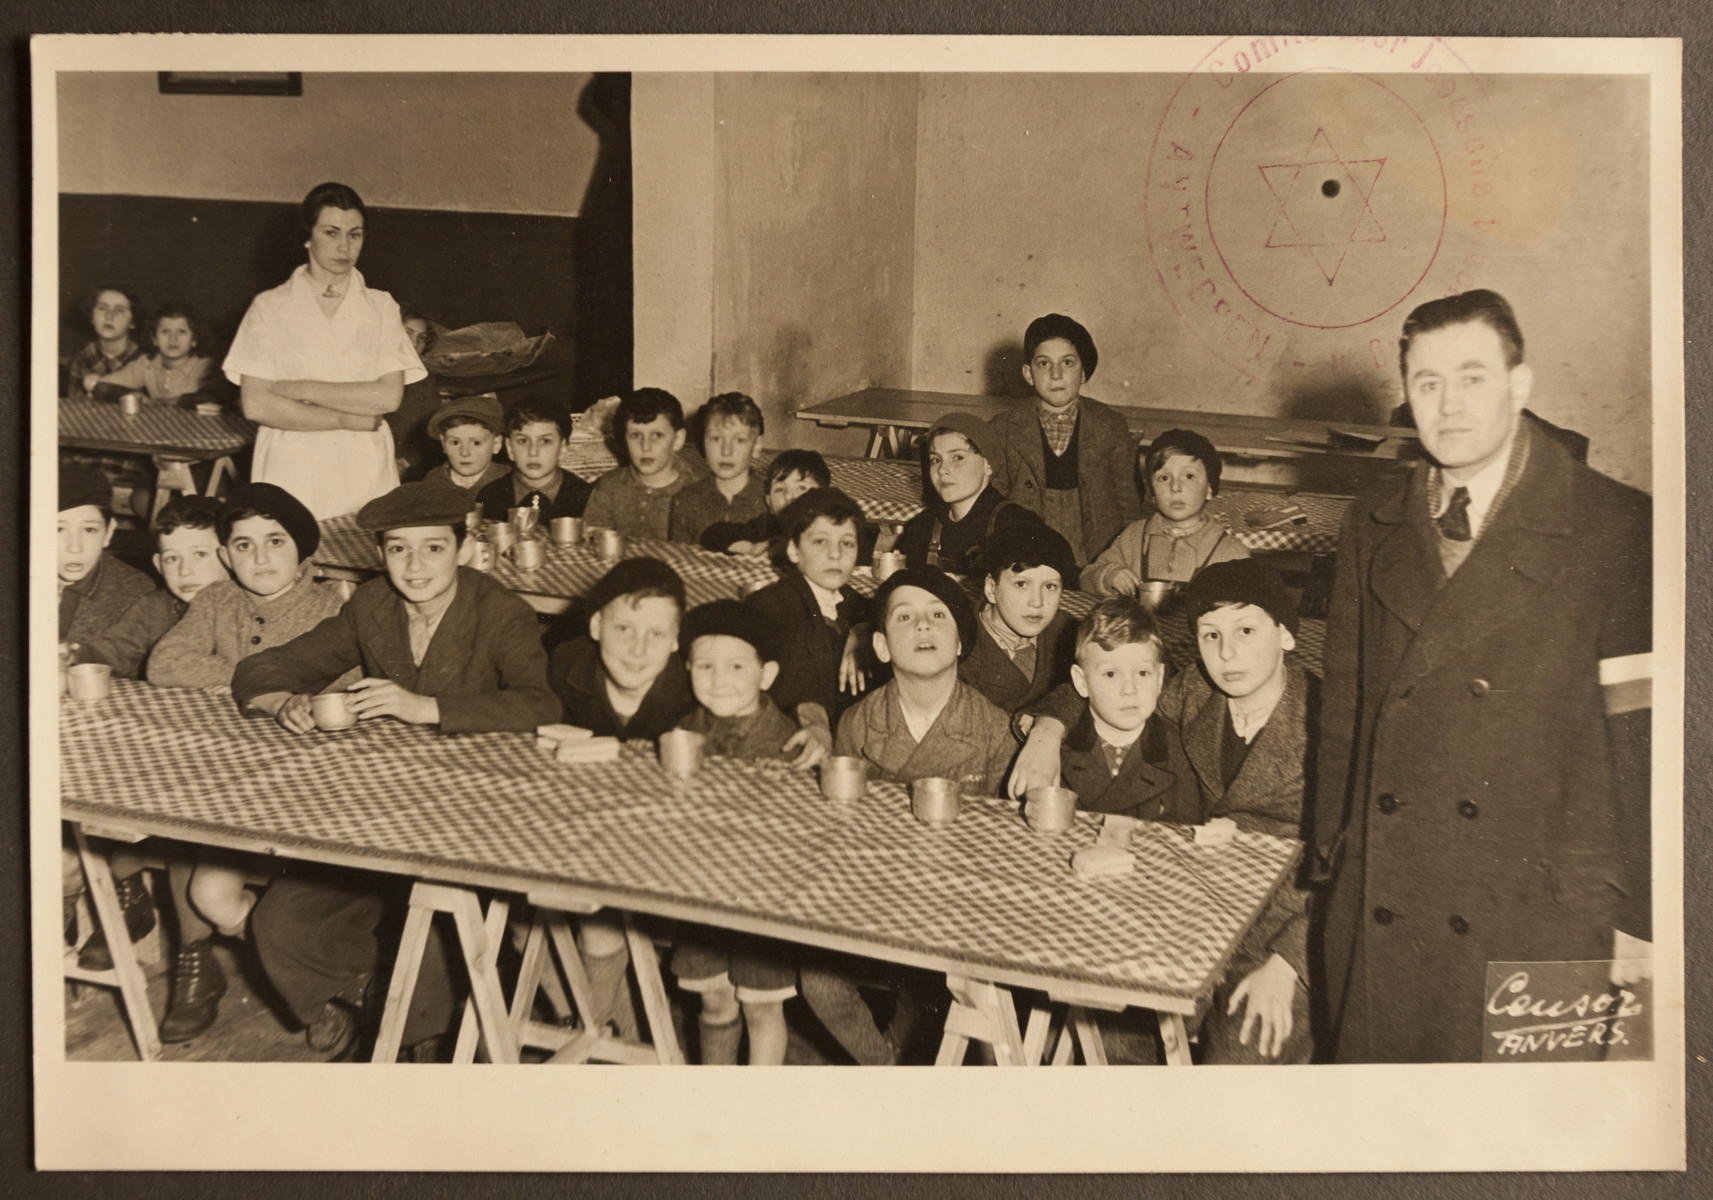 Refugee children wait to be served in the dining room of the Jewish Refugee Aid Committee of Antwerp.